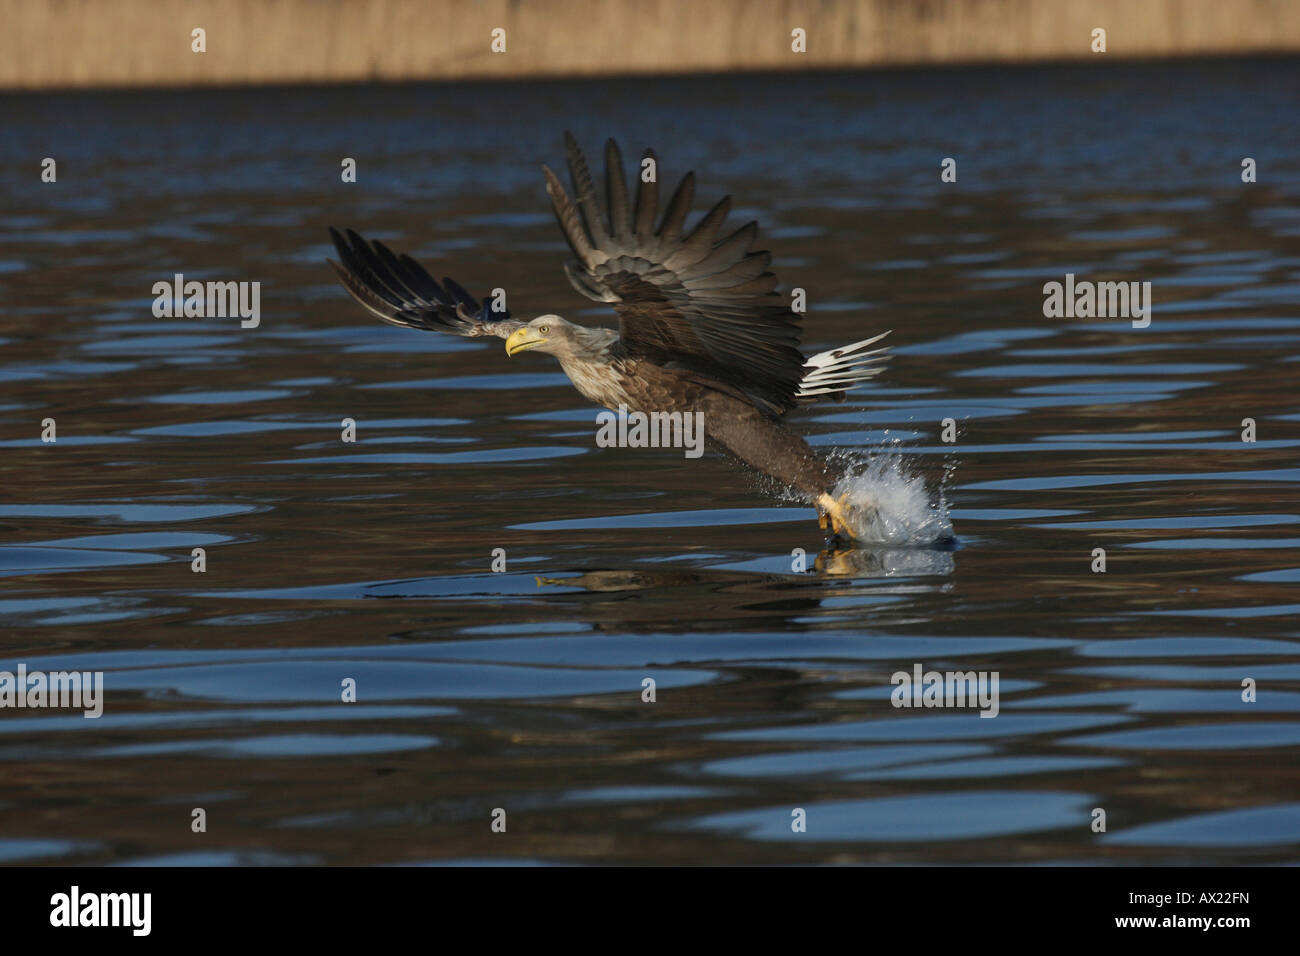 White-tailed Eagle or Sea Eagle (Haliaeetus albicilla) grabbing fish from the water's surface Stock Photo